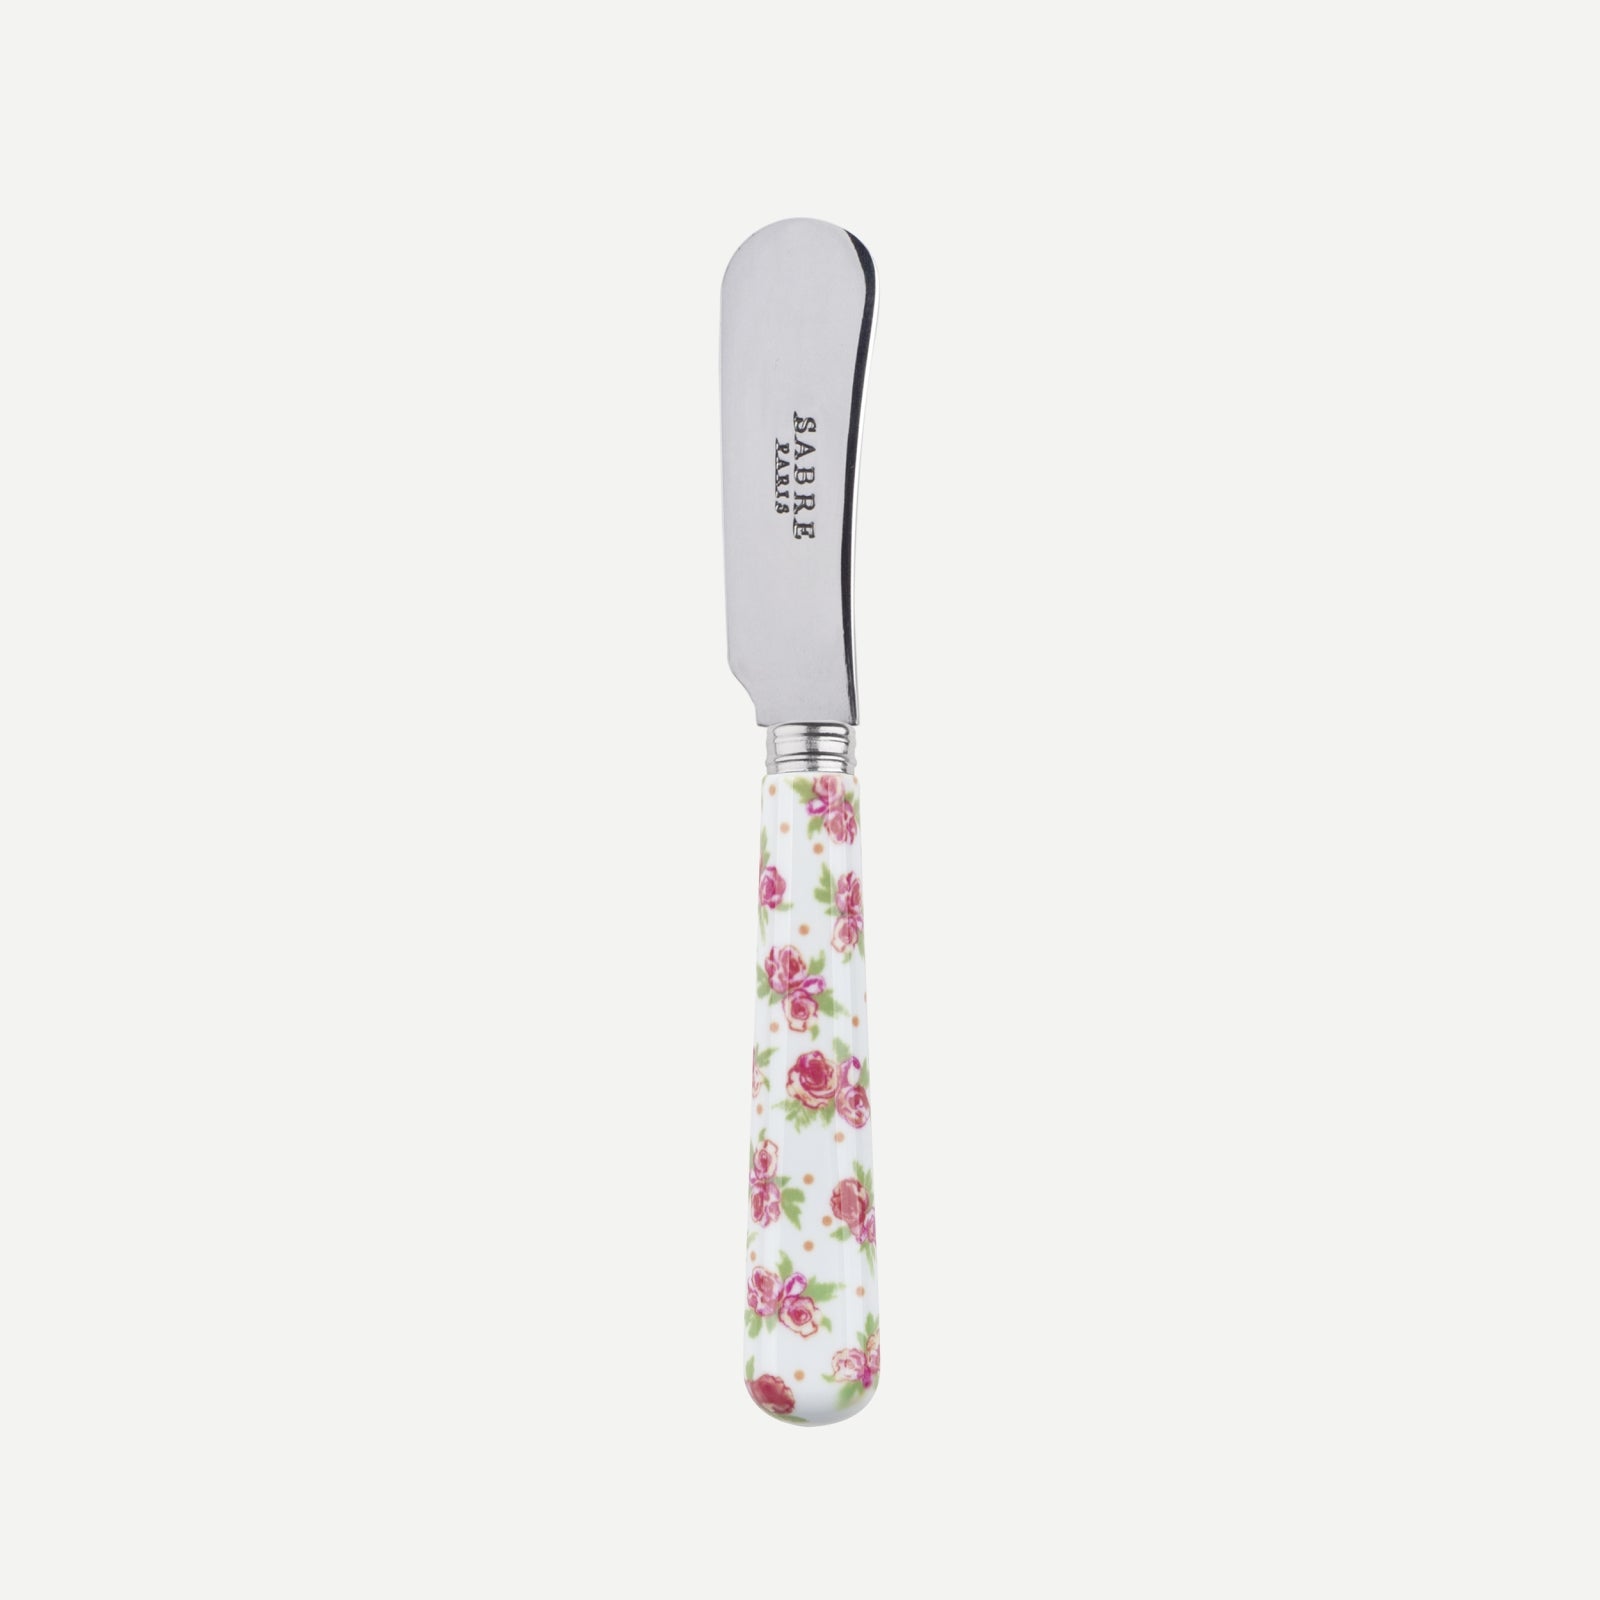 Butter spreader - Liberty - White